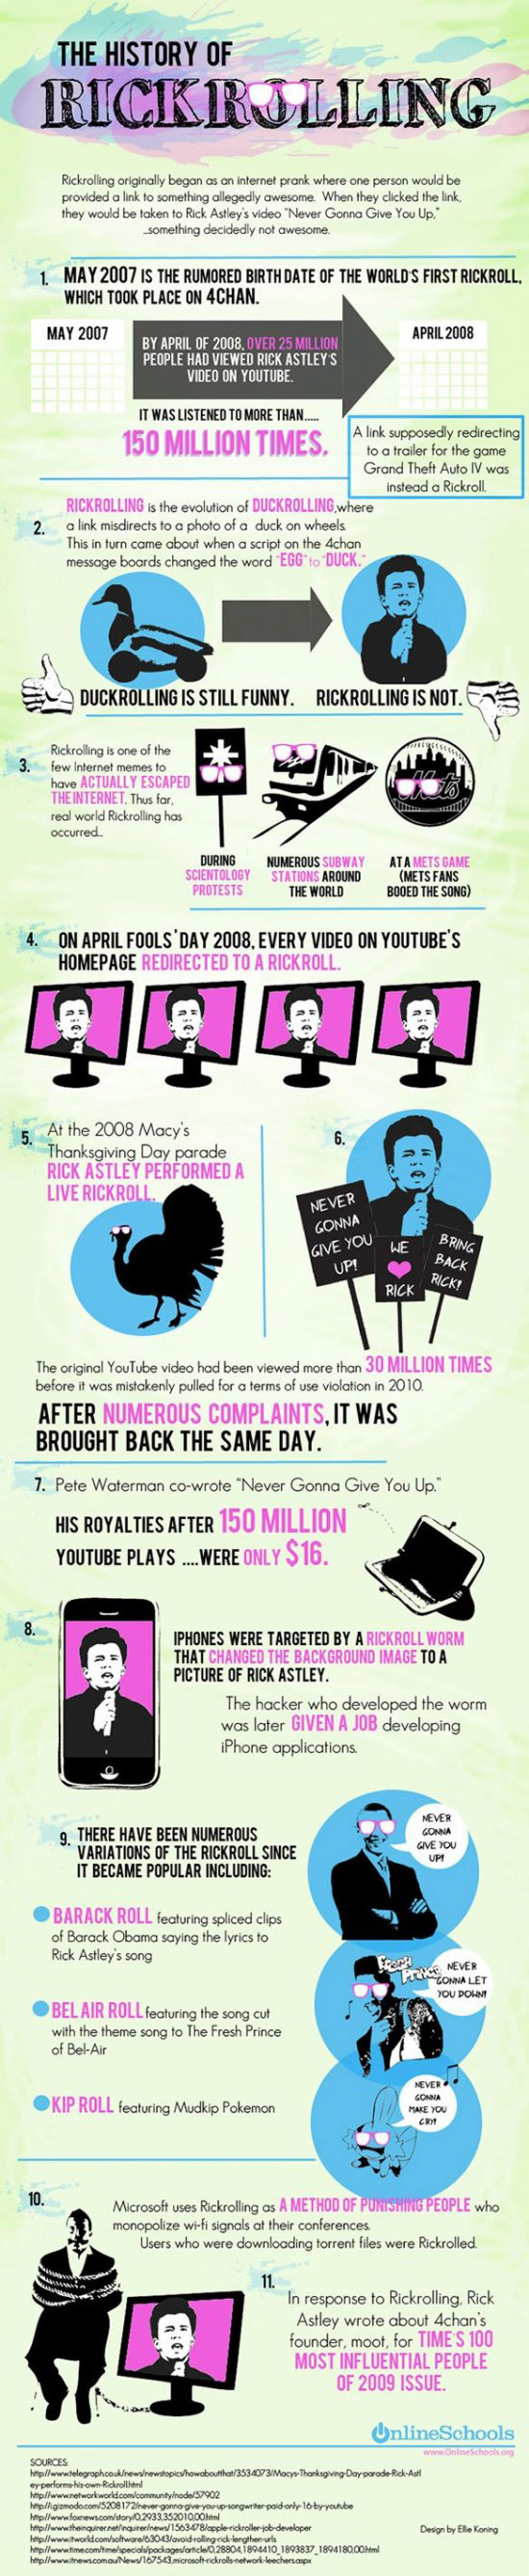 The history of rickrolling